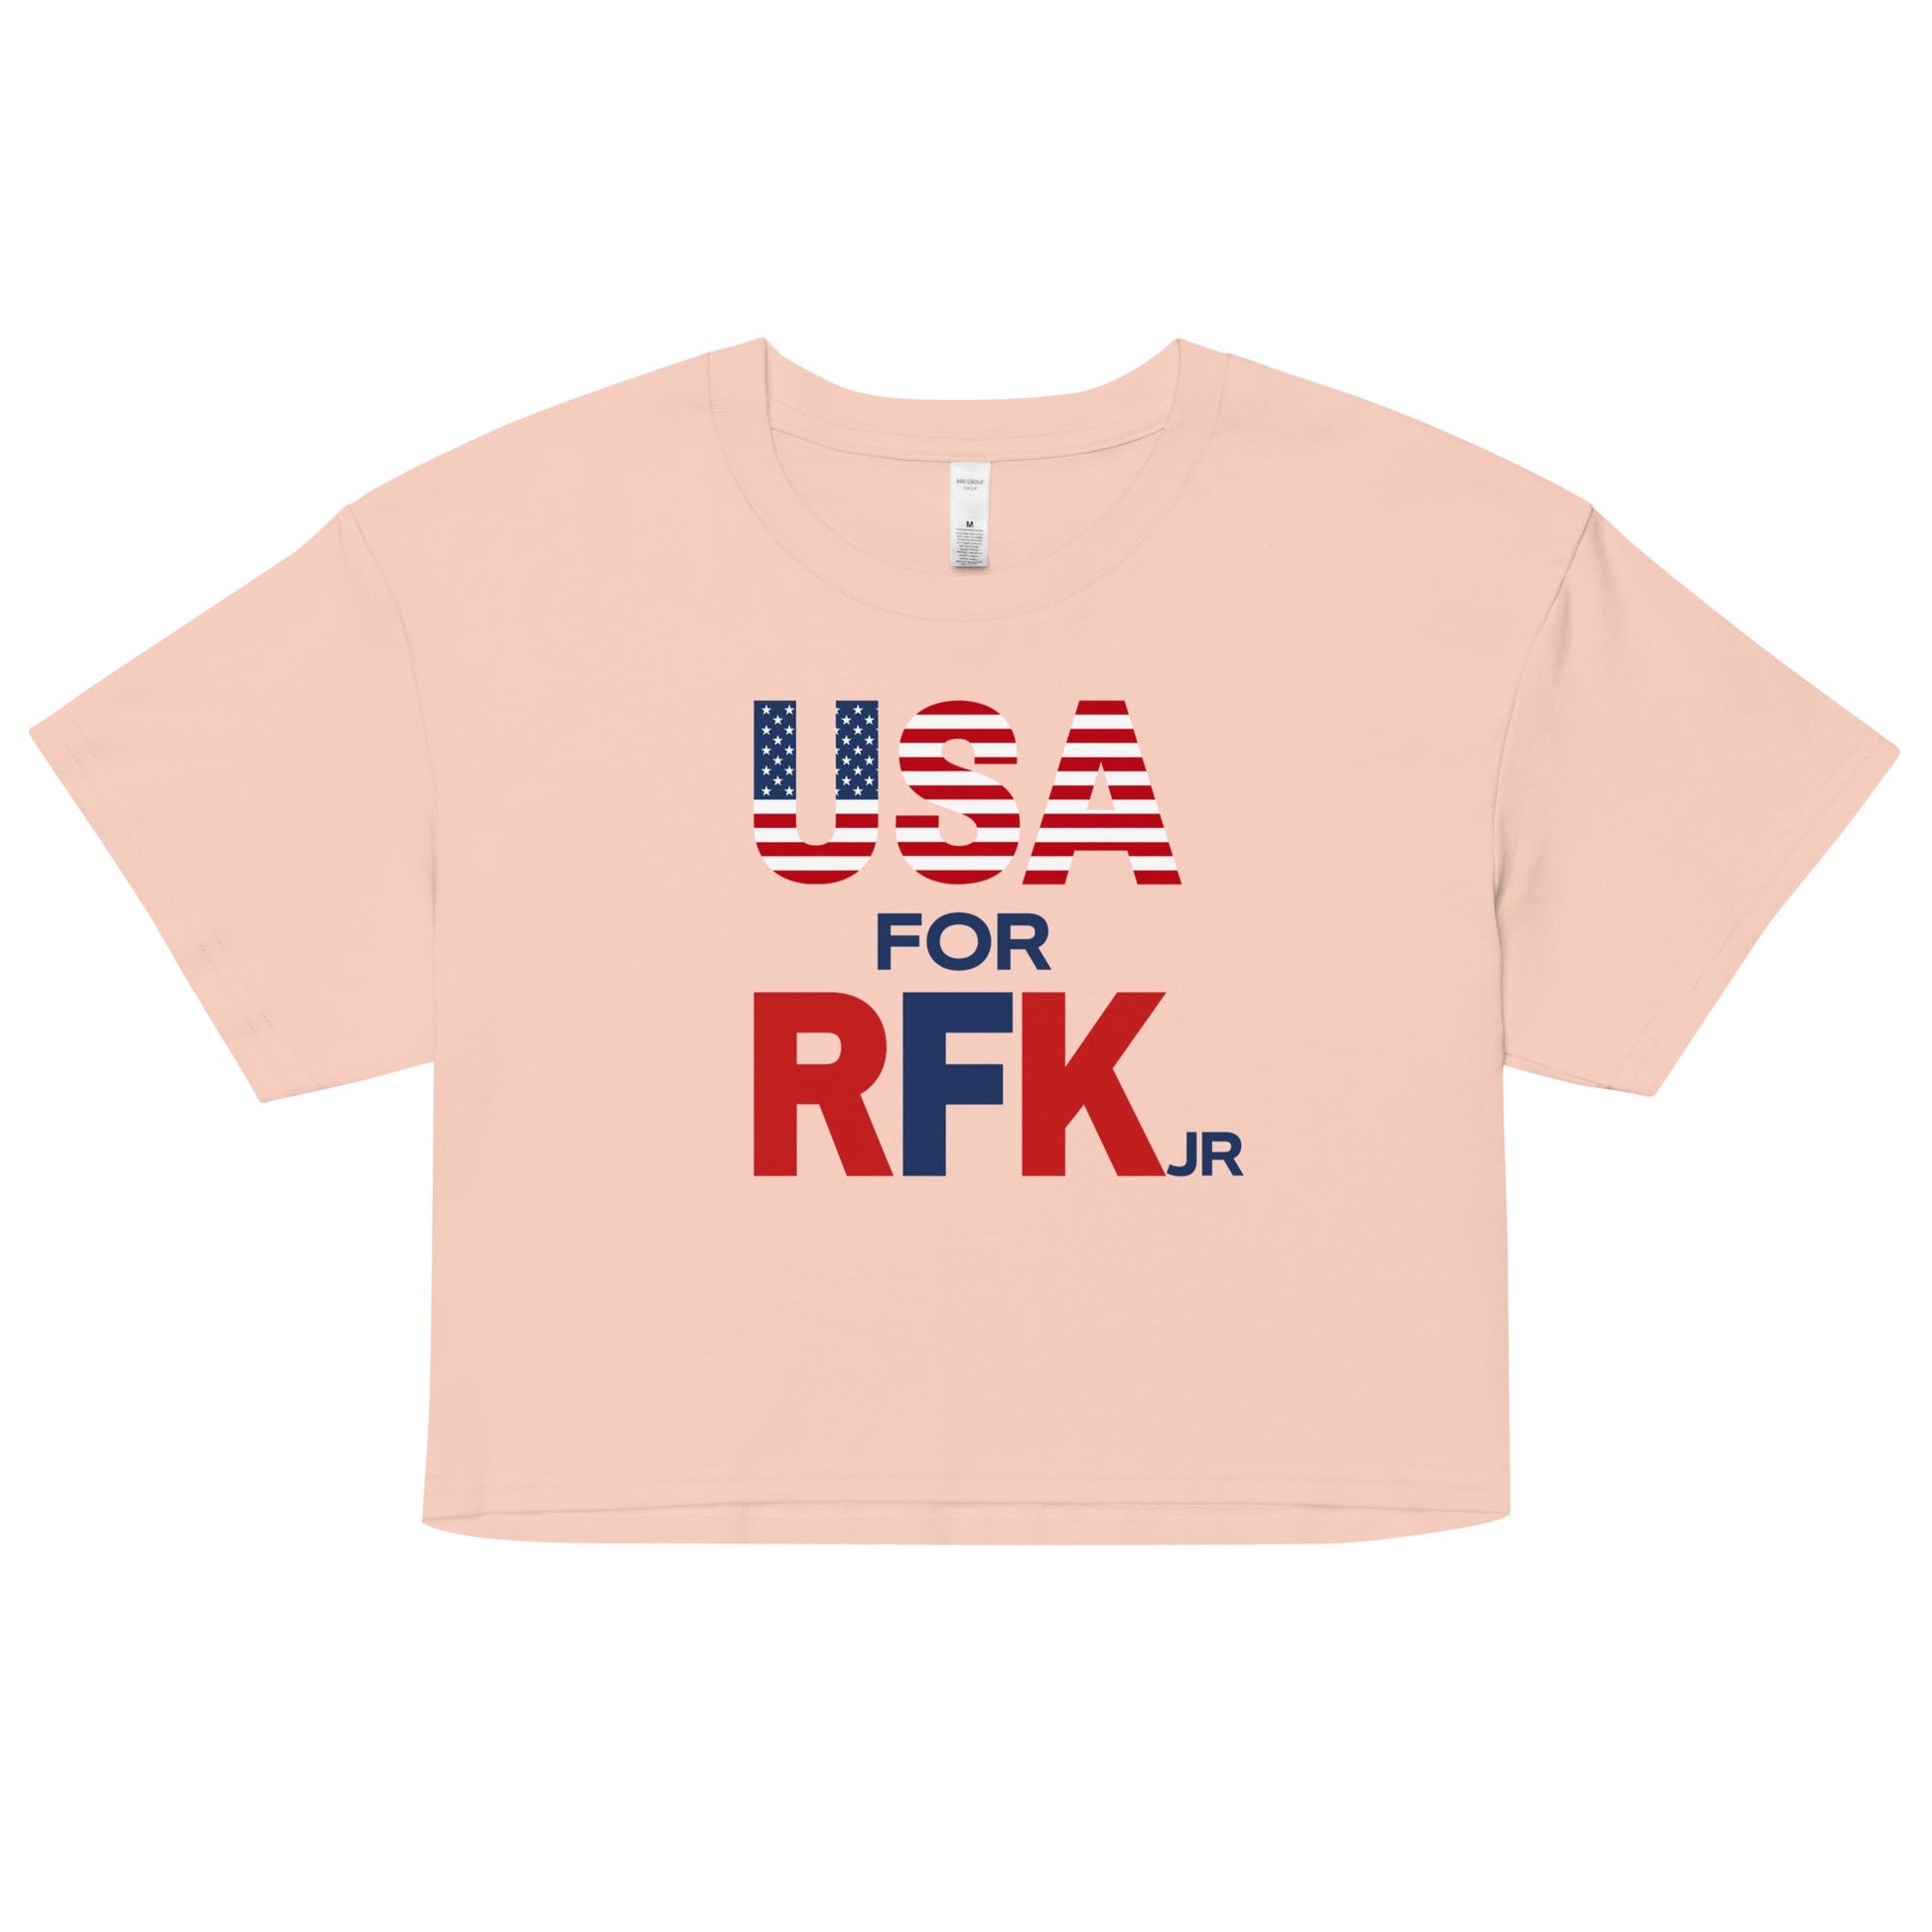 USA for RFK JR Women’s Crop Top - TEAM KENNEDY. All rights reserved